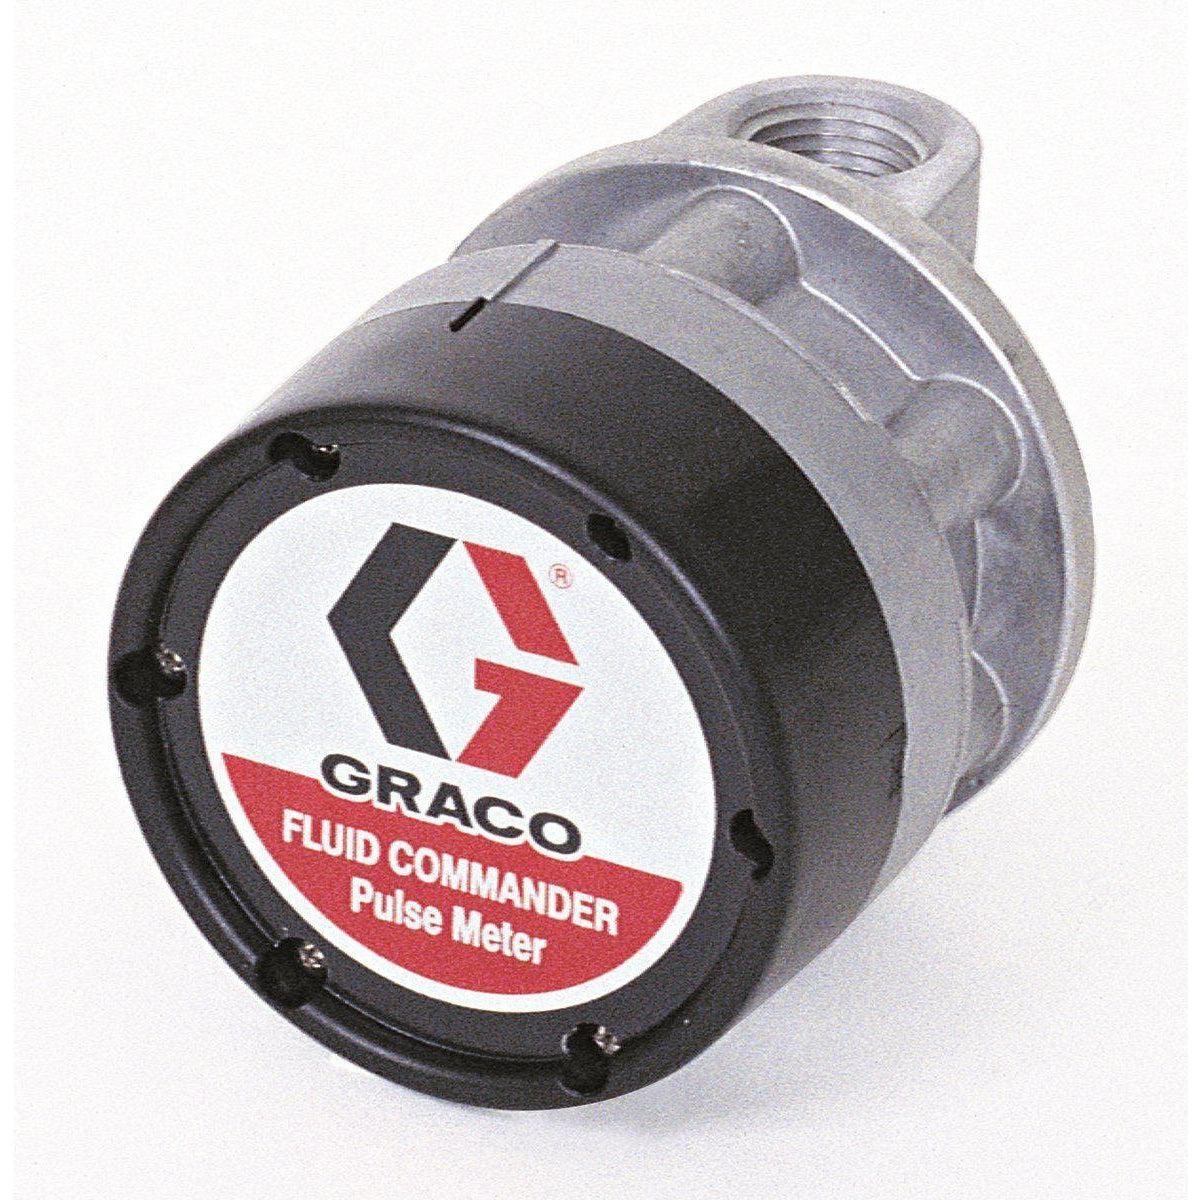 Graco 236763 In-Line Meter With Pulse Output (Pints, Quarts, Gallons) - Fireball Equipment Ltd.